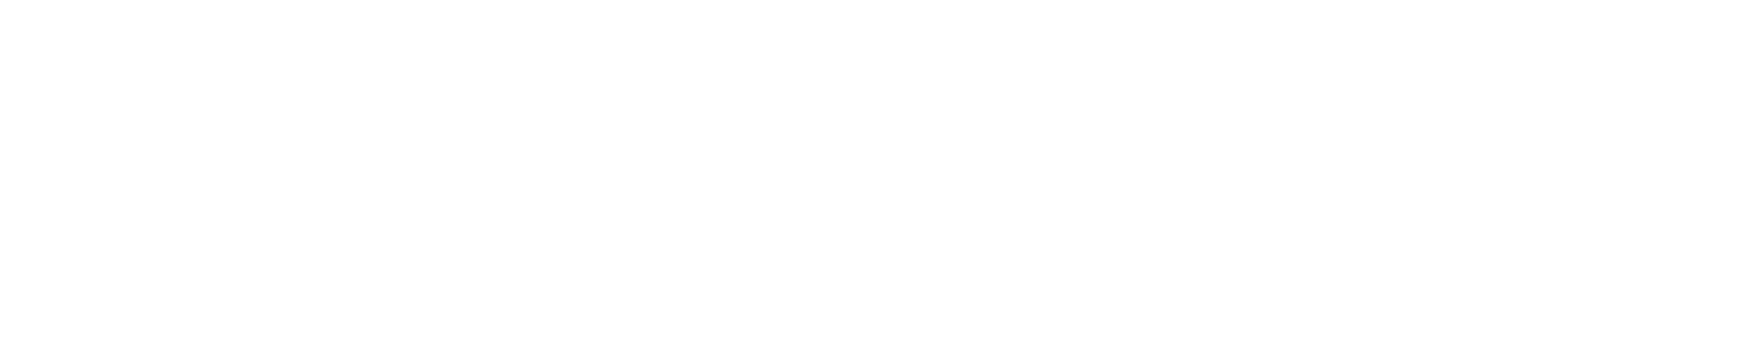 Wordmark for the Department of Parks, Recreation & Tourism for Prince William County